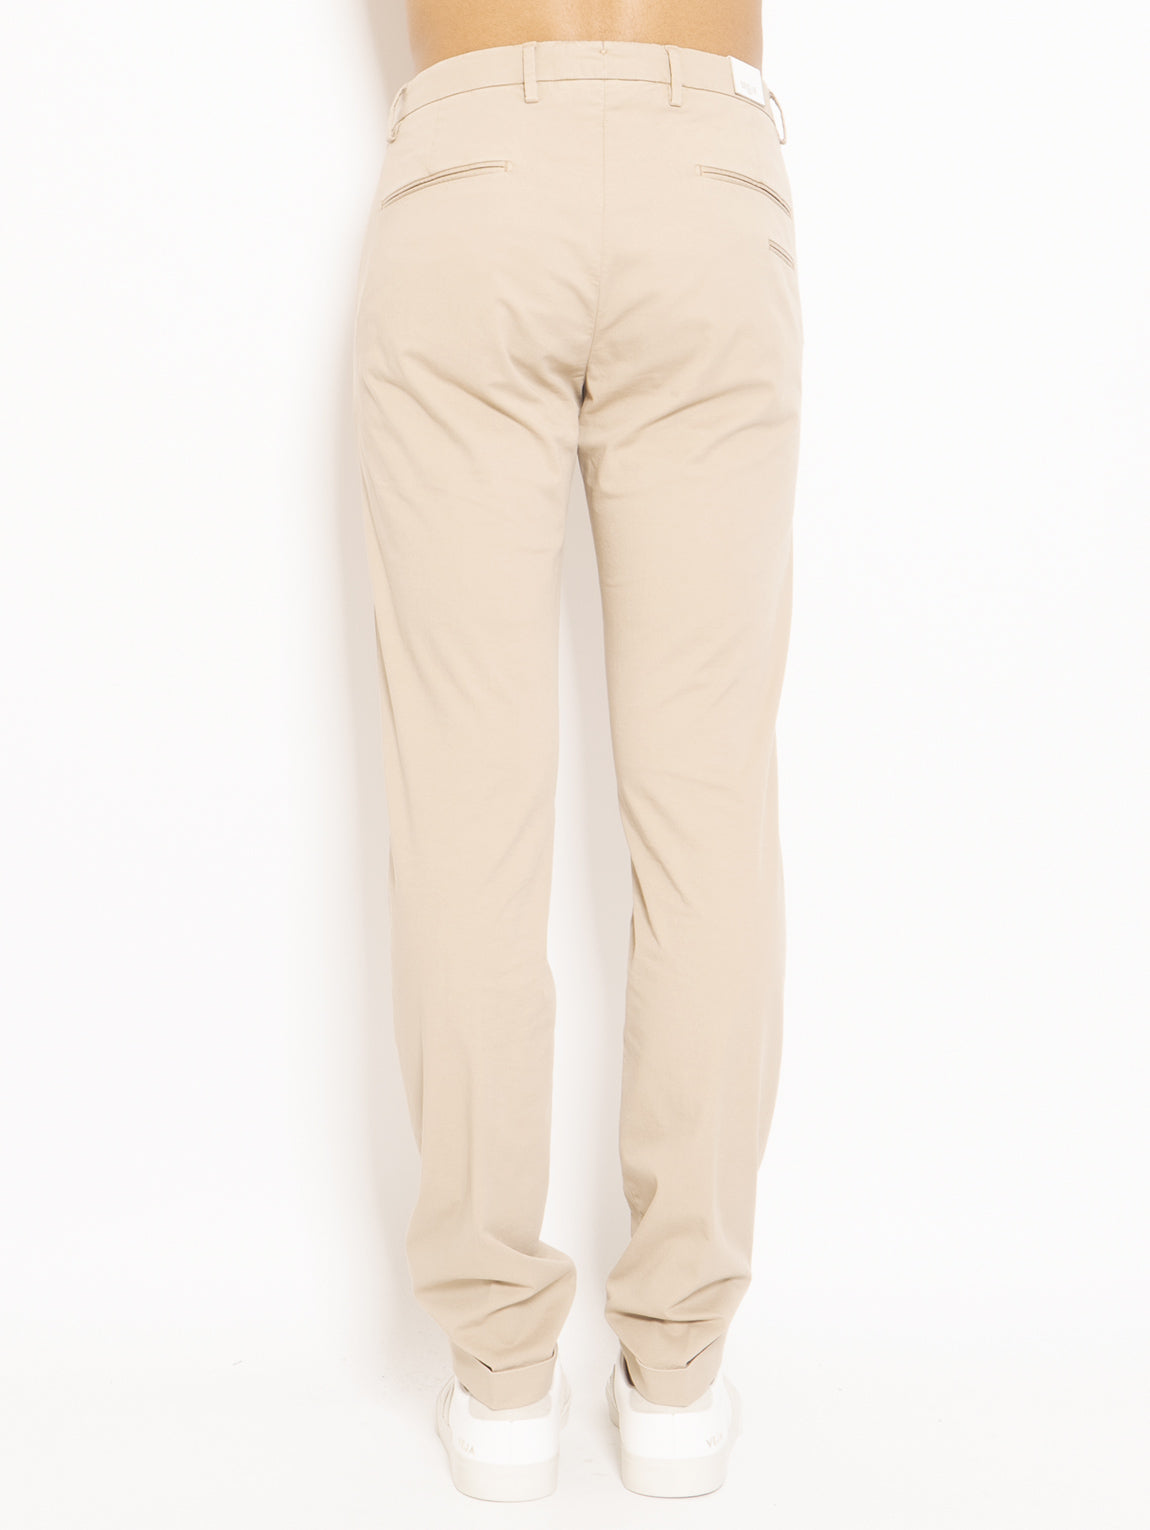 Trousers with Beige Lapel